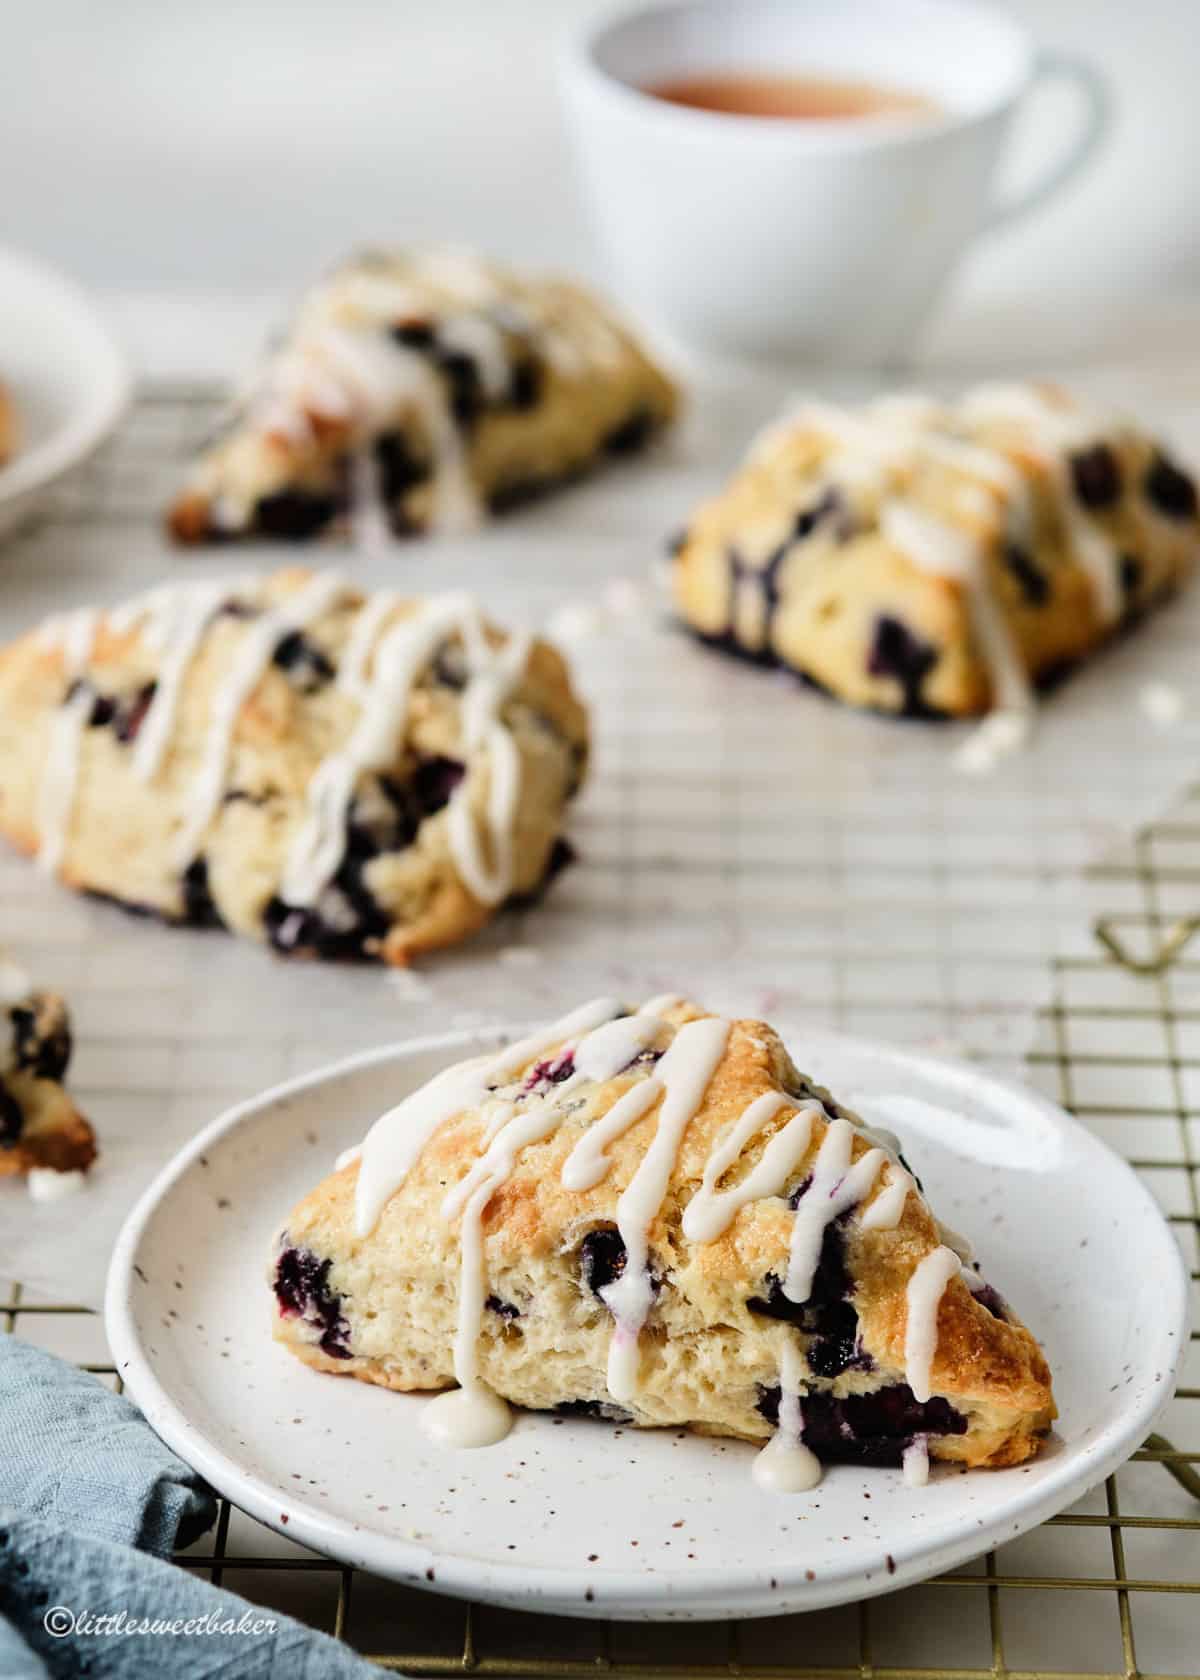 A blueberry scone on a plate with other on a cooling rack.